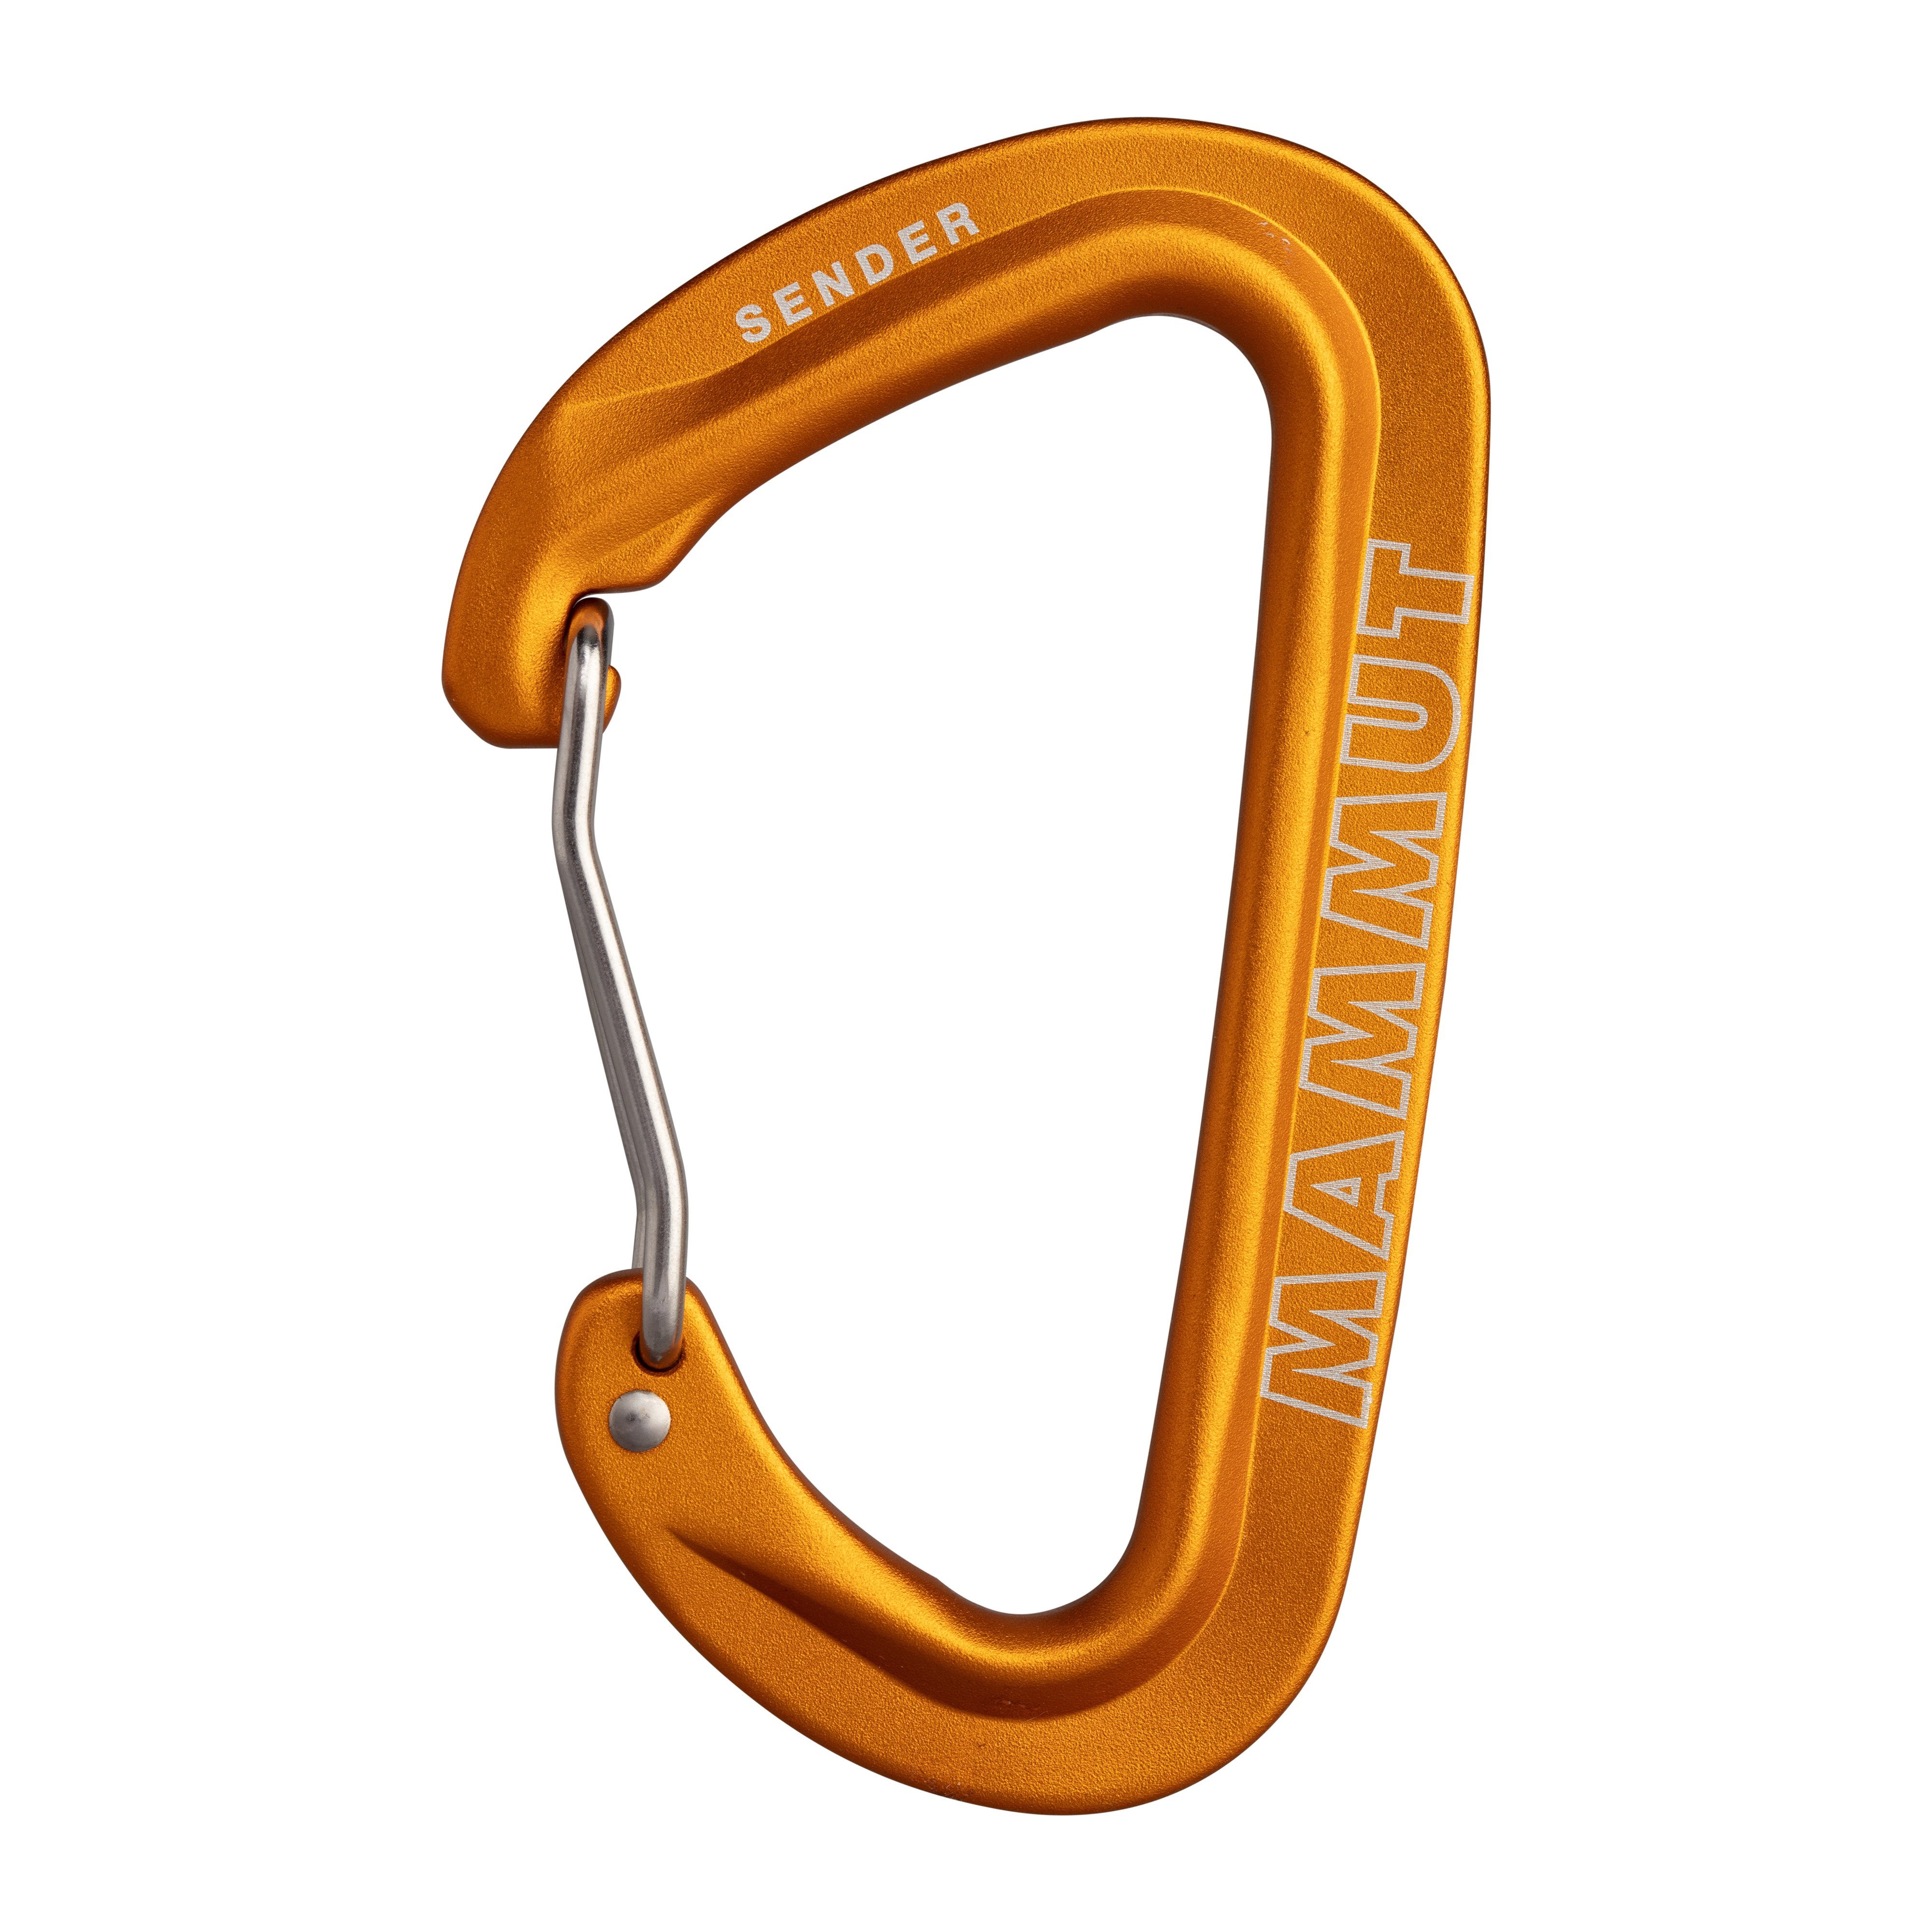 Sender Wire Carabiner - one size product image